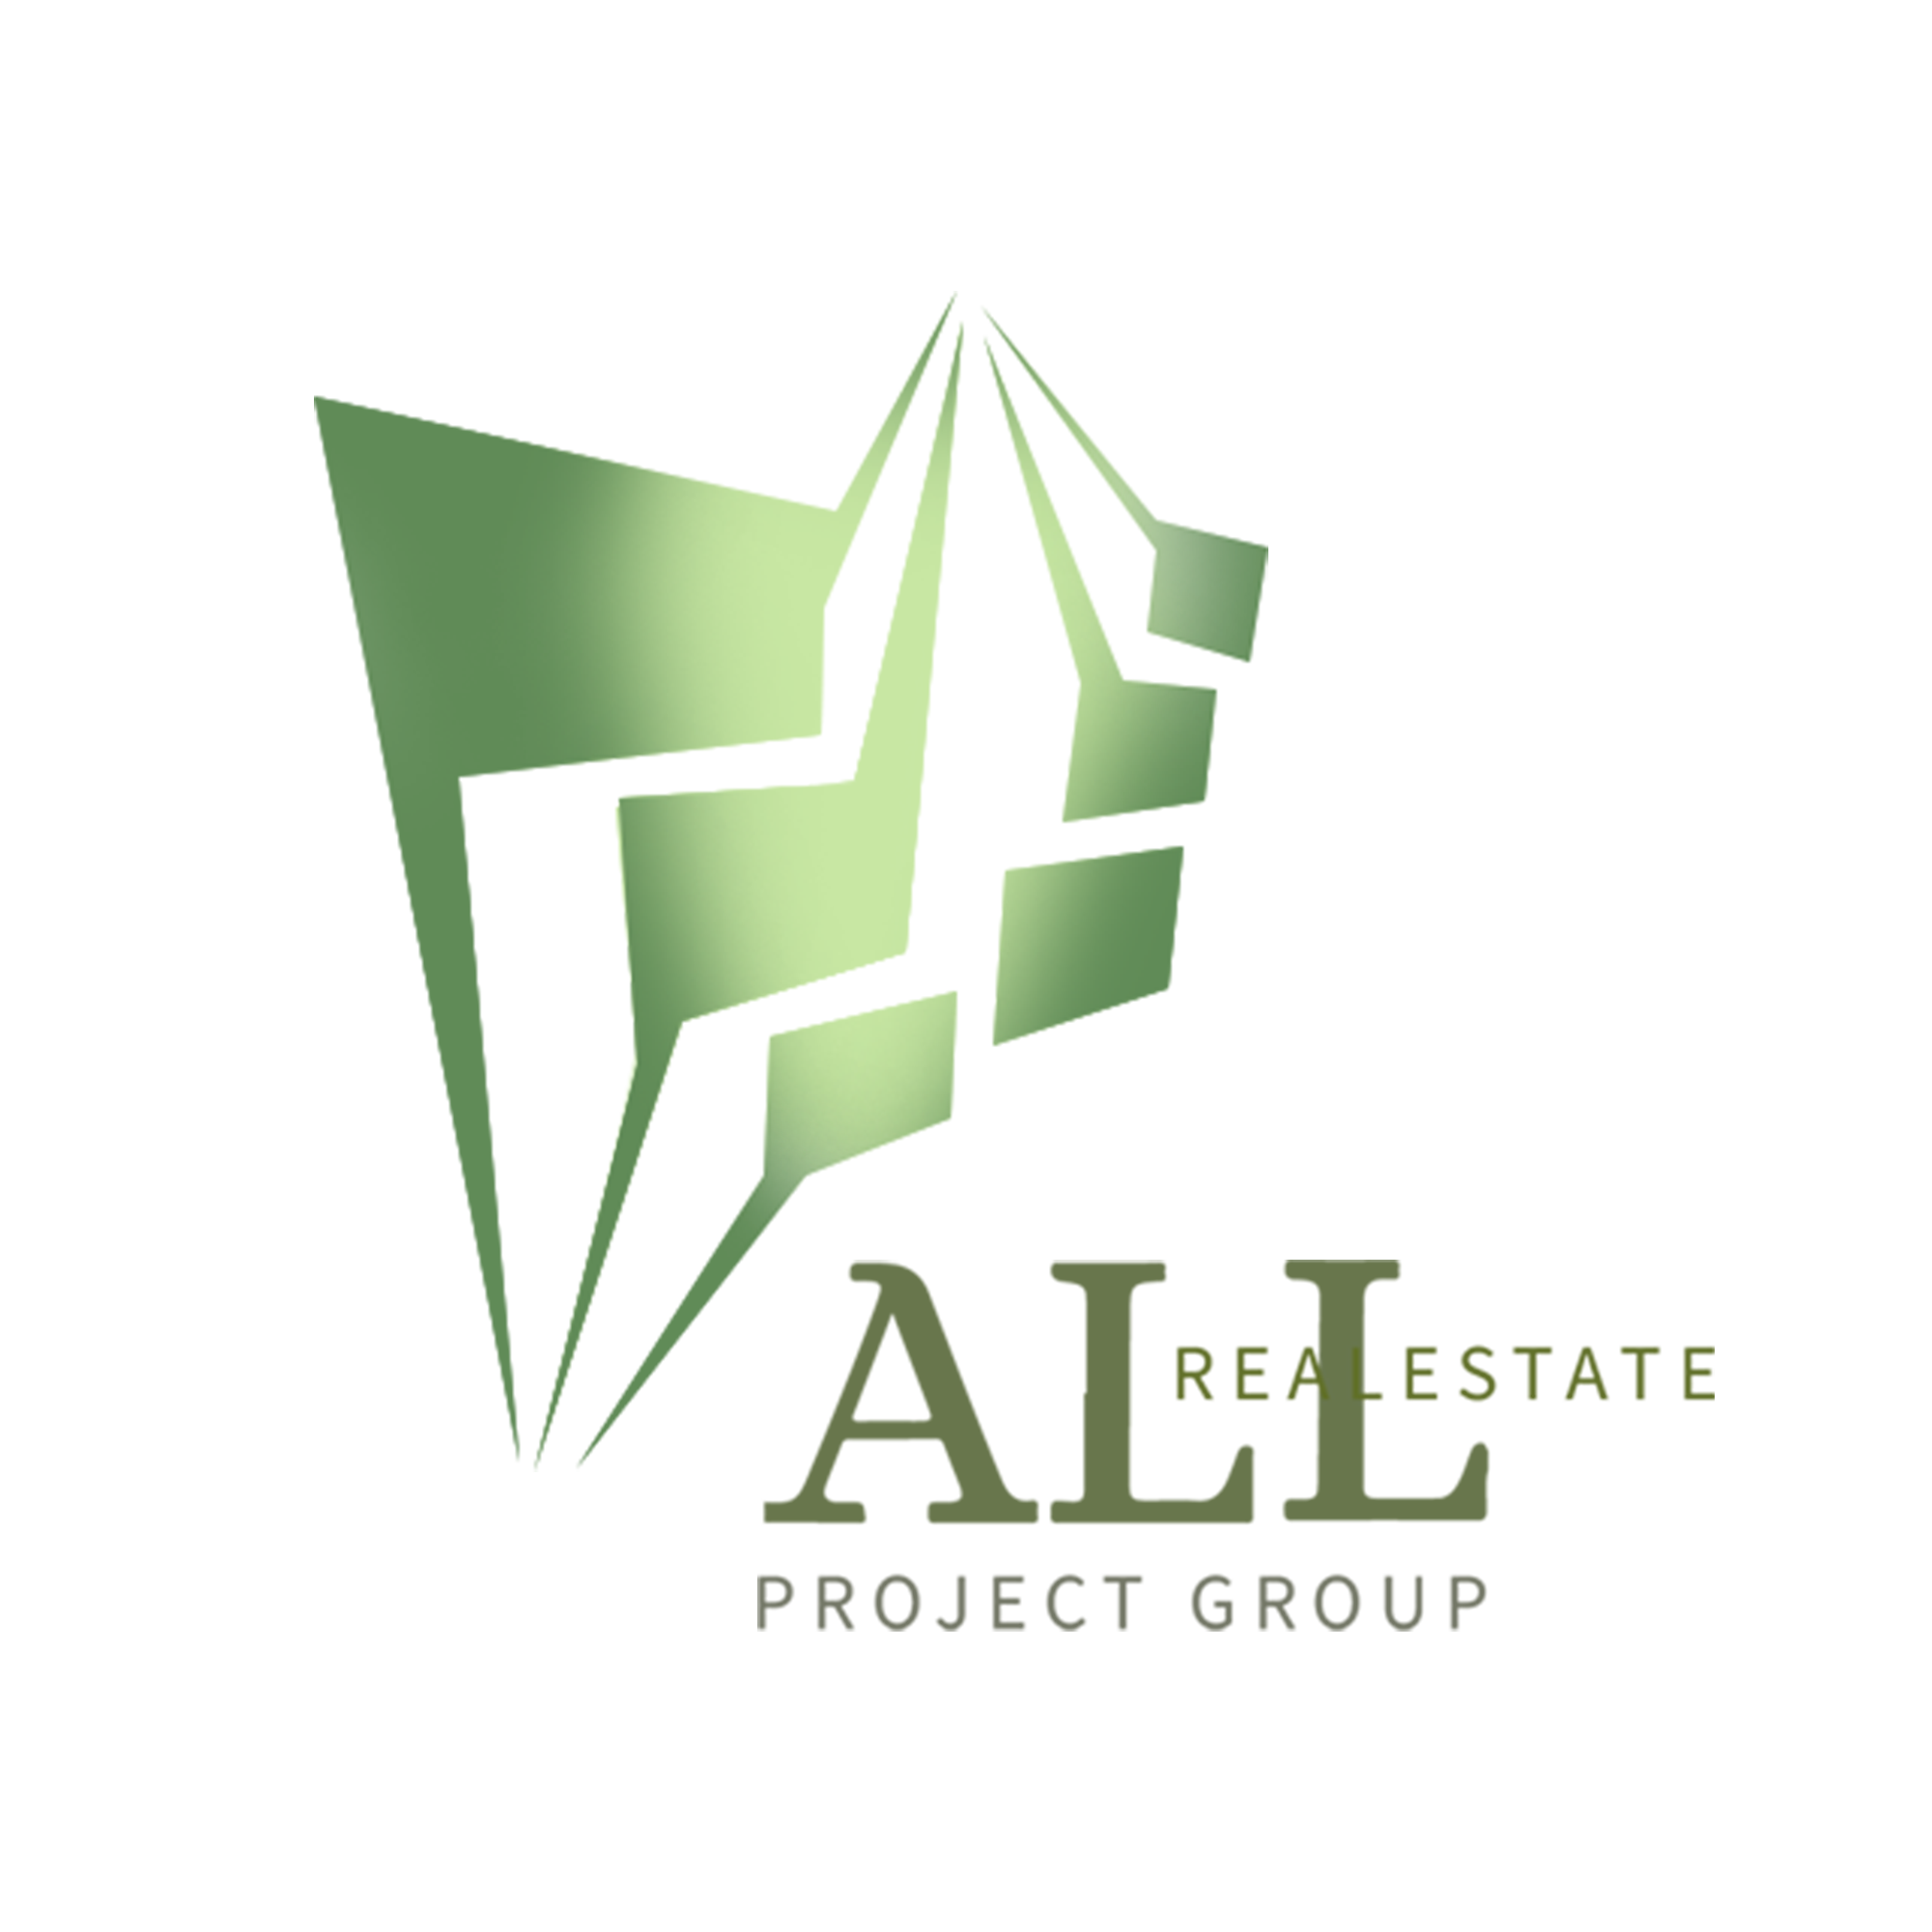 All Project Group